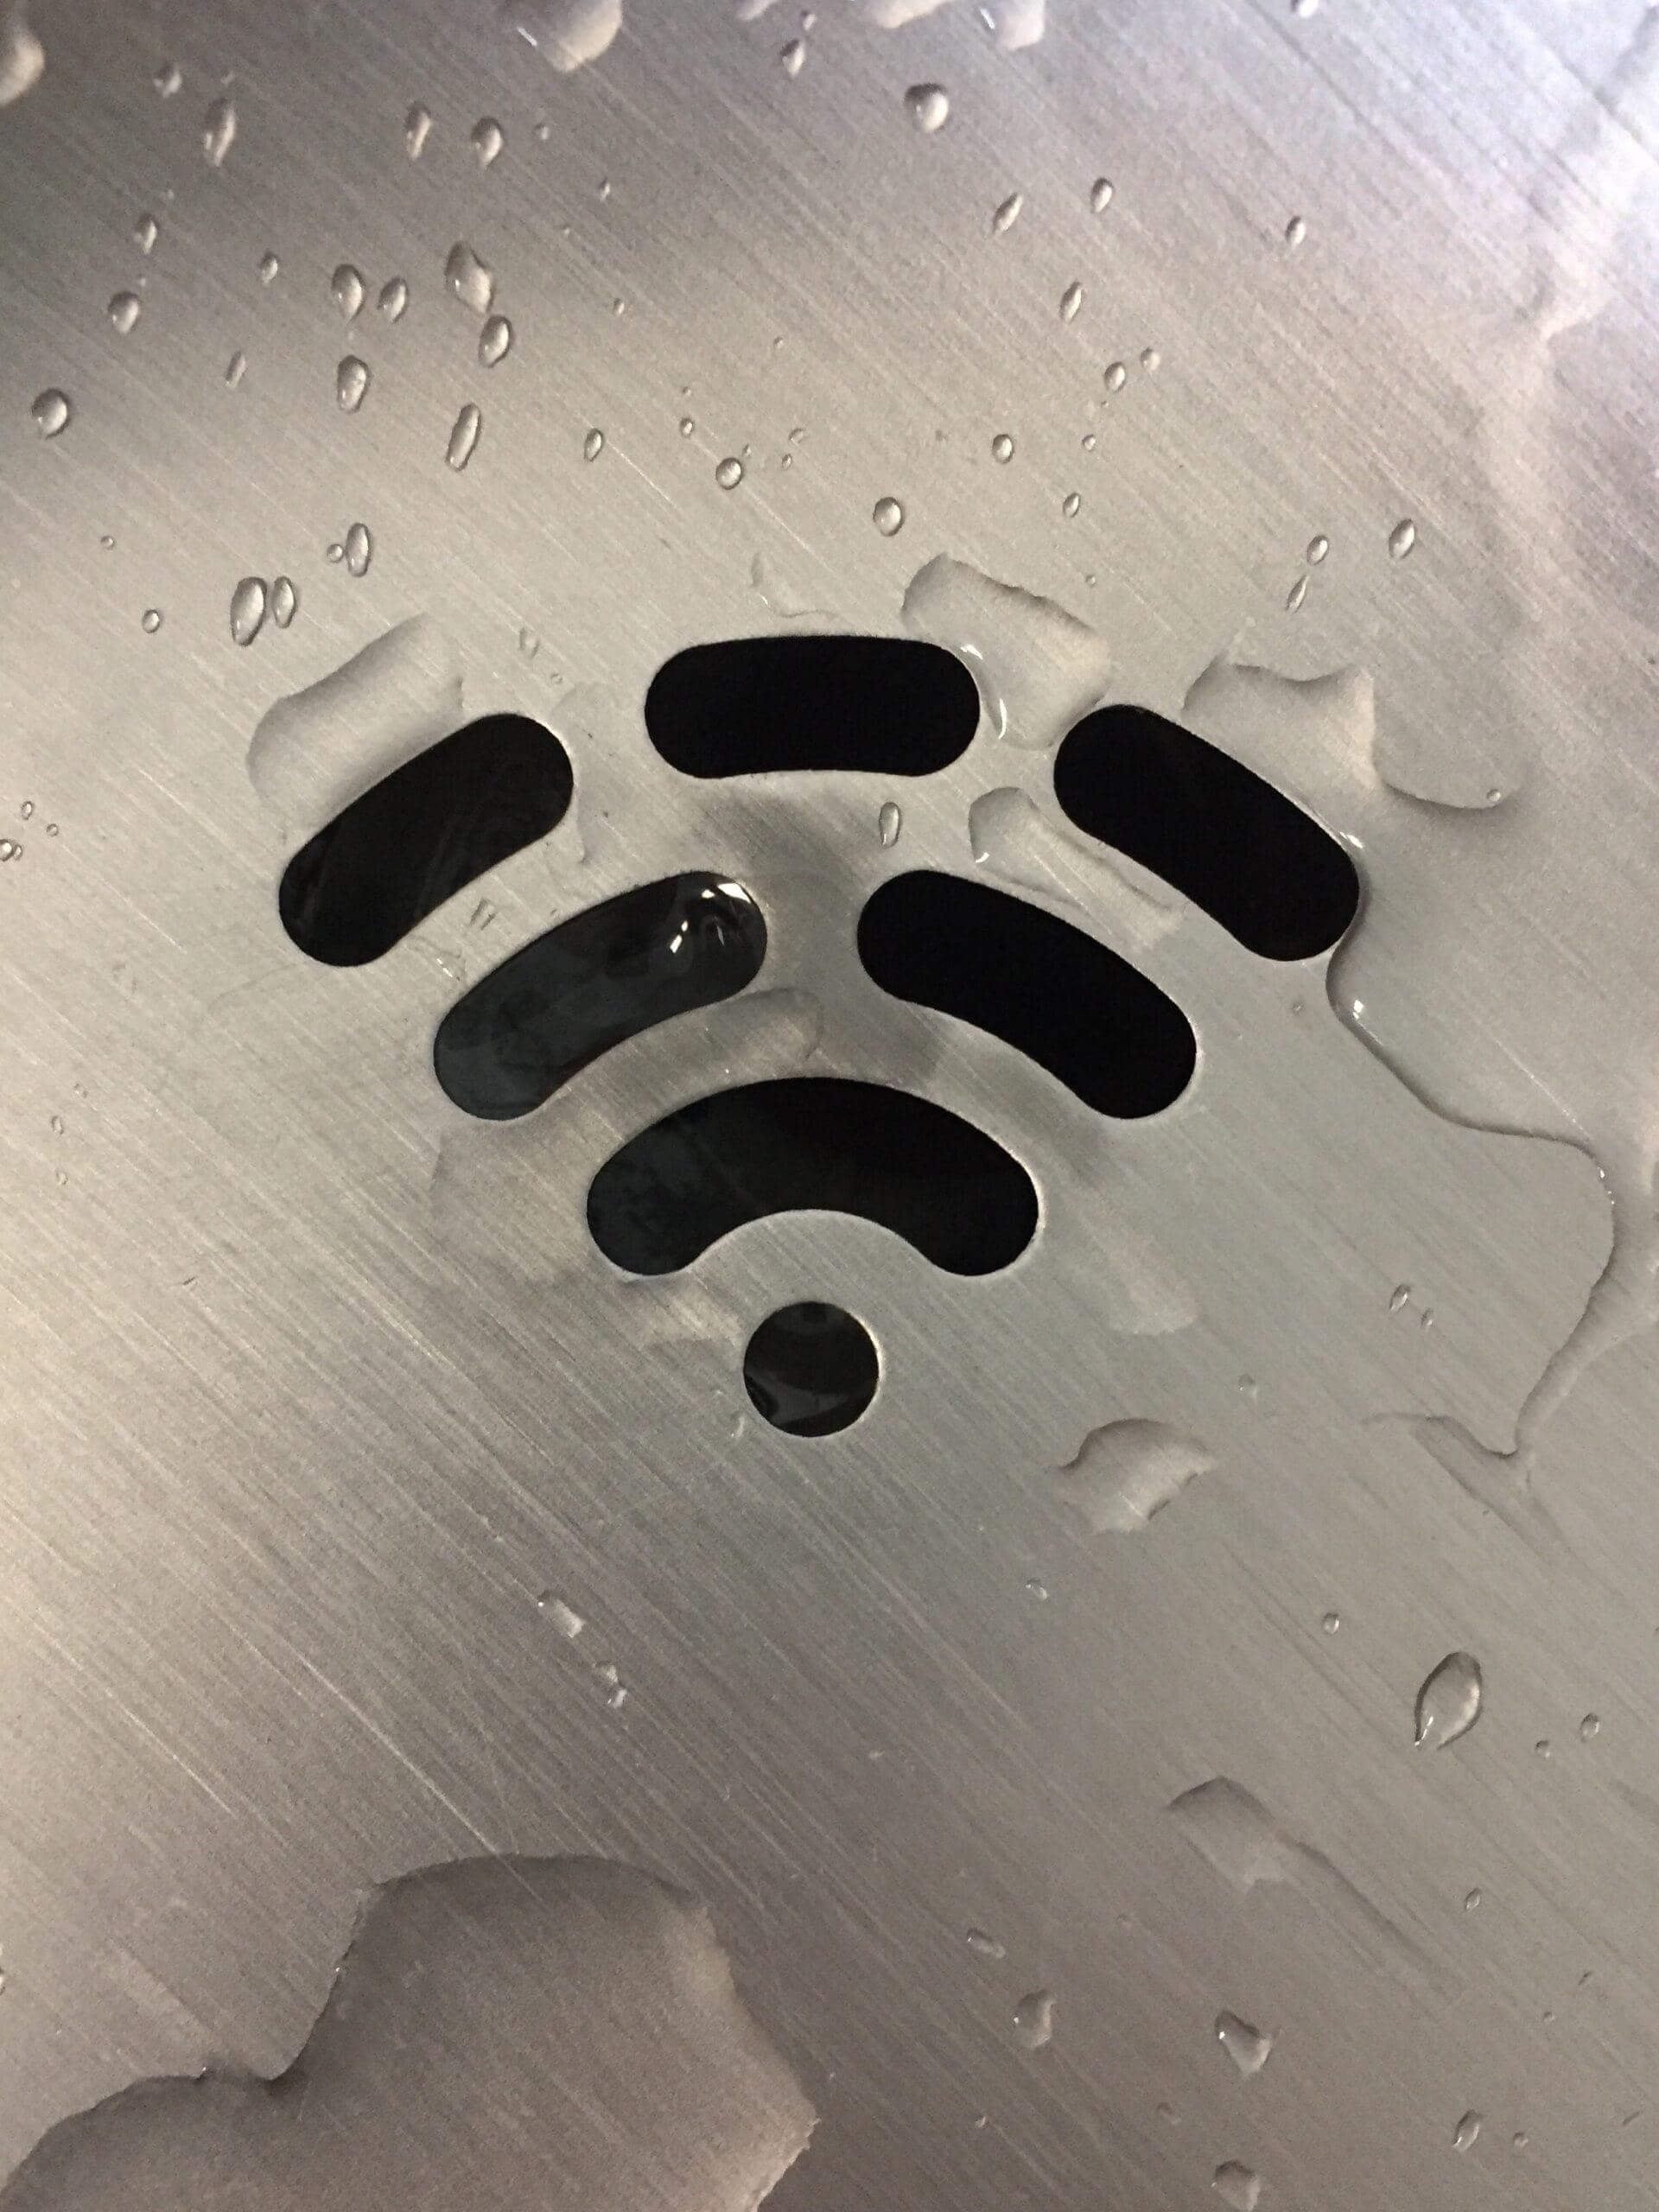 Drain in a sink shaped to look like a Wifi symbol.